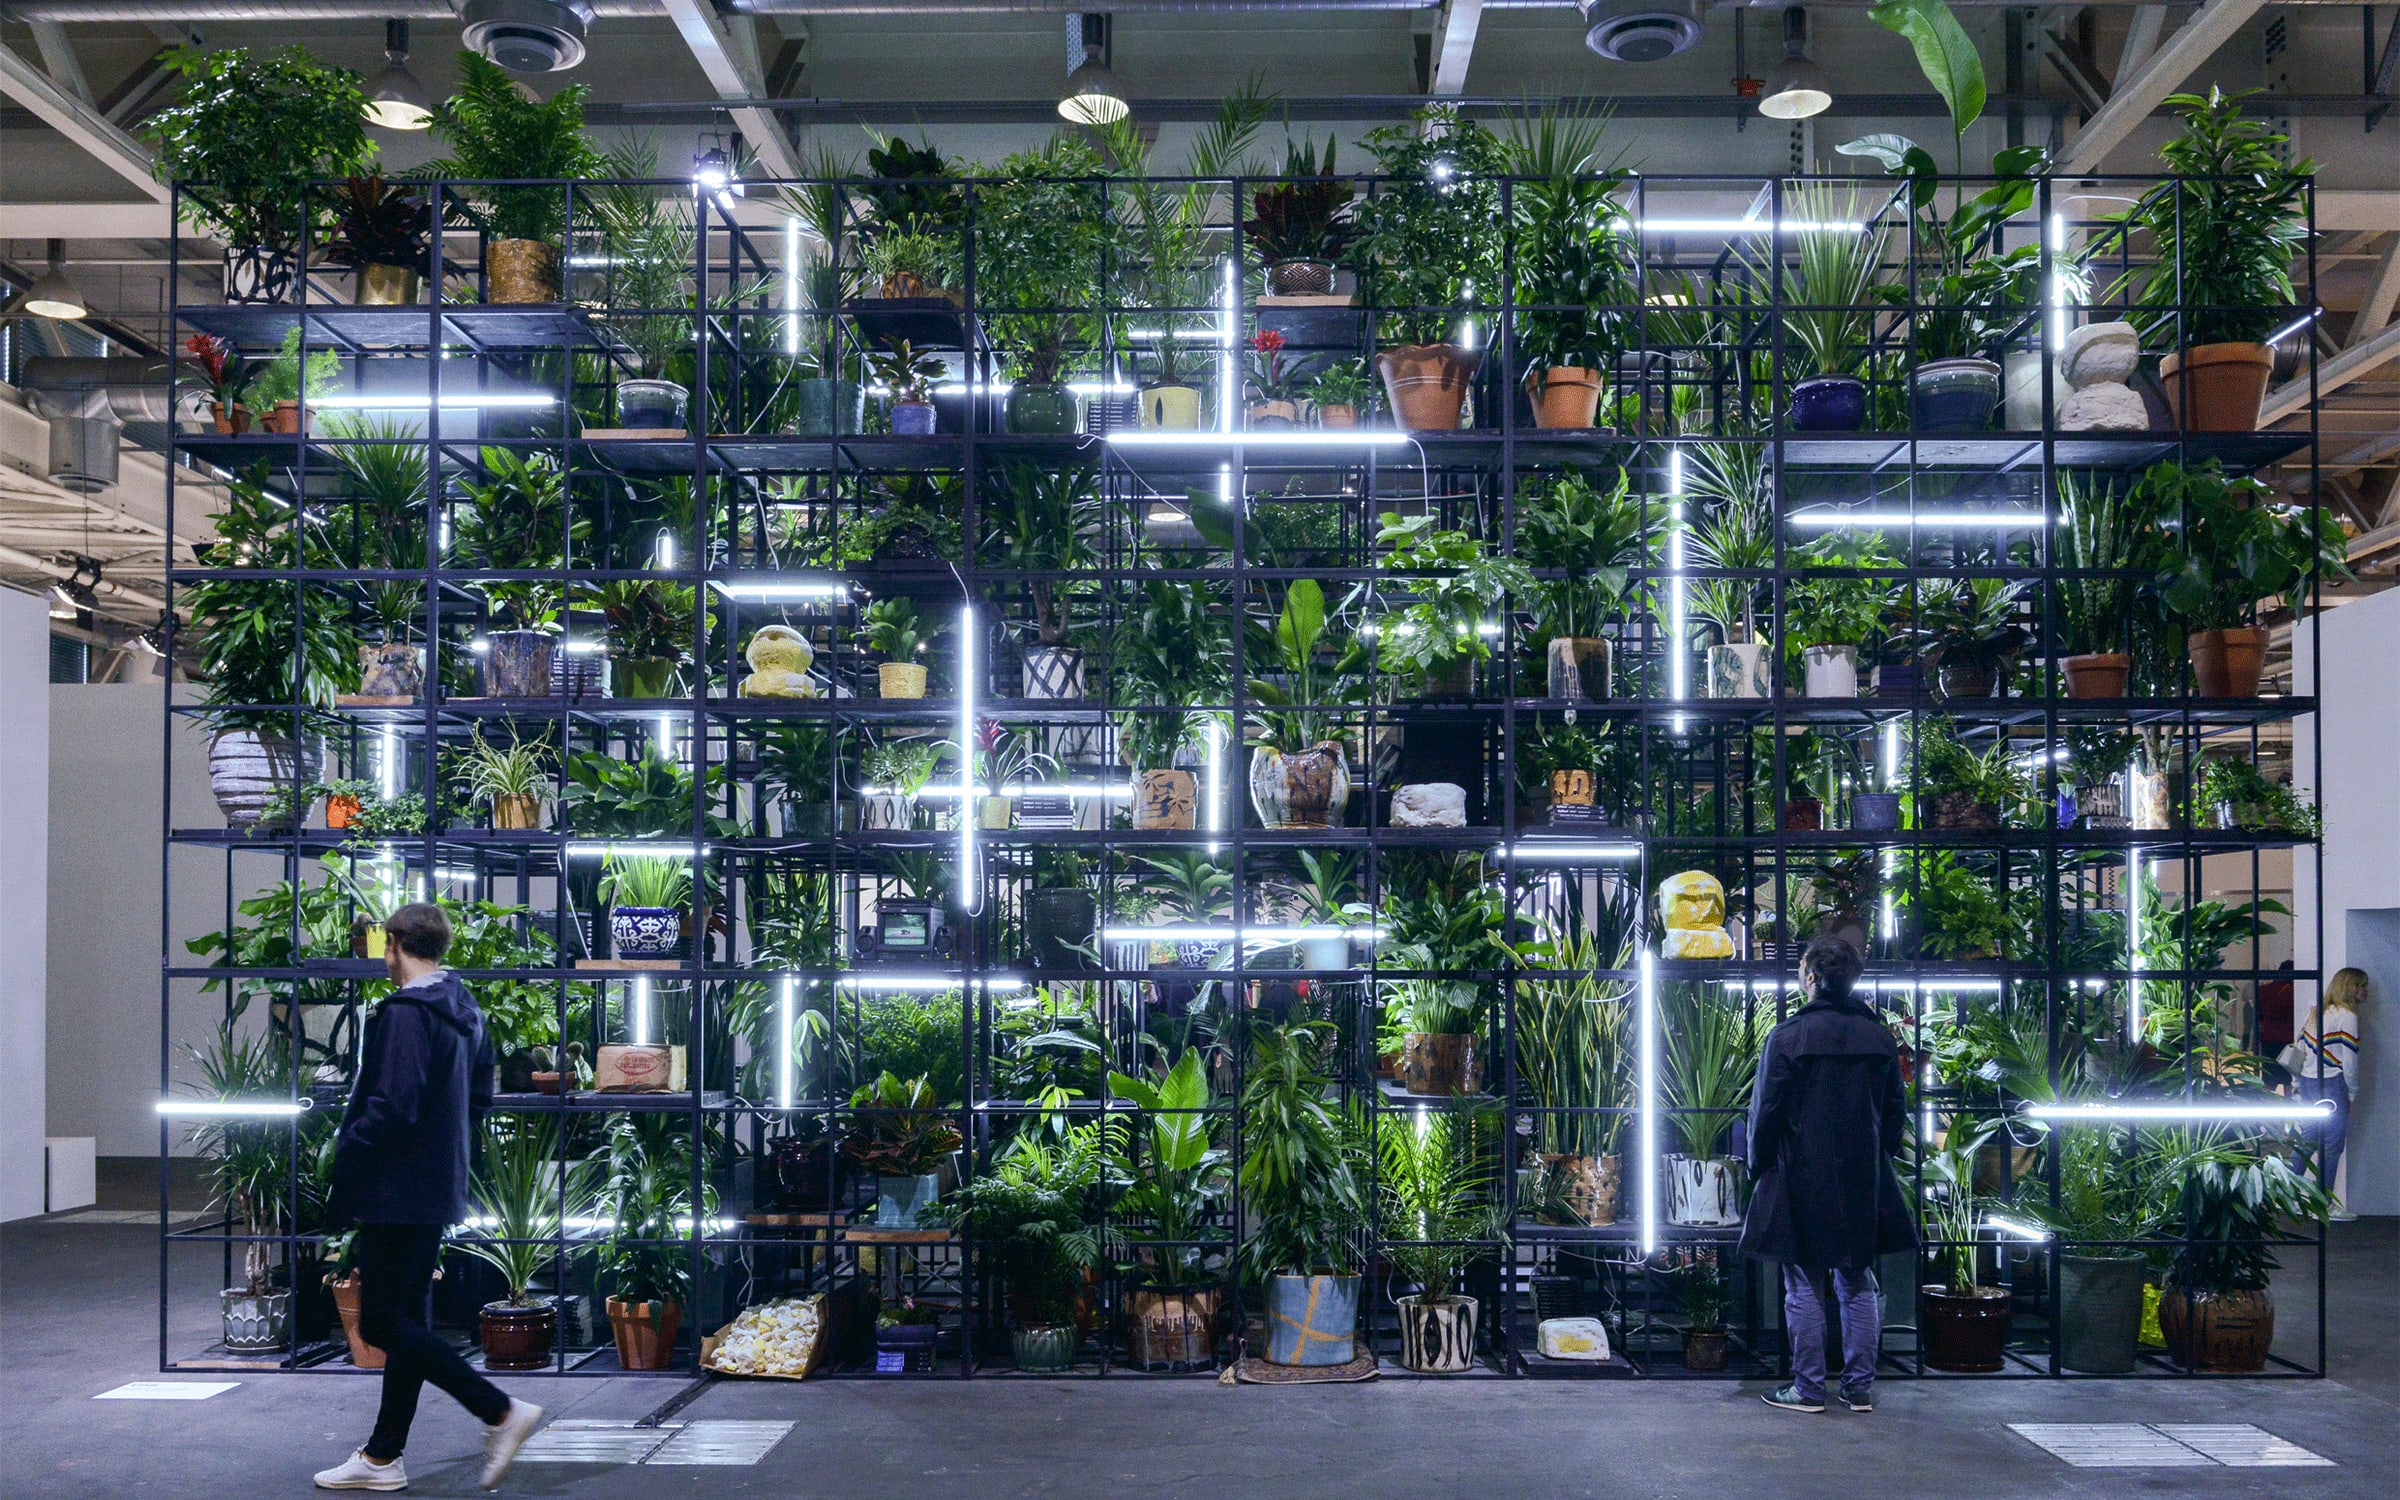 Artwork by Rashid Johnson presented by Hauser & Wirth in the Unlimited sector of Art Basel in Basel 2018.